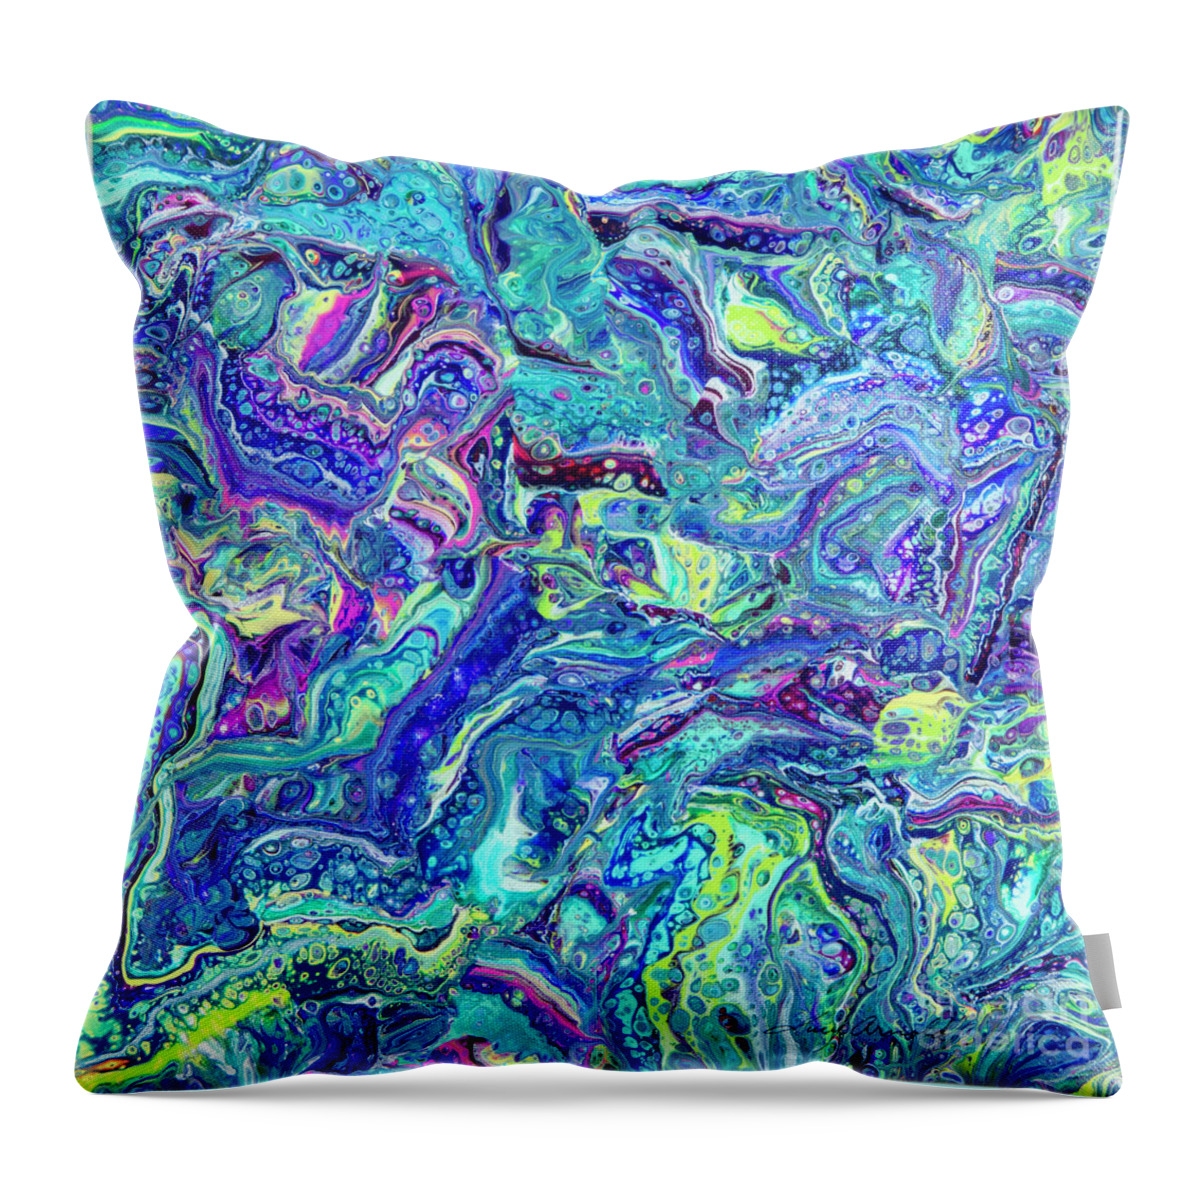 Poured Acrylics Throw Pillow featuring the painting Confetti Dimension by Lucy Arnold